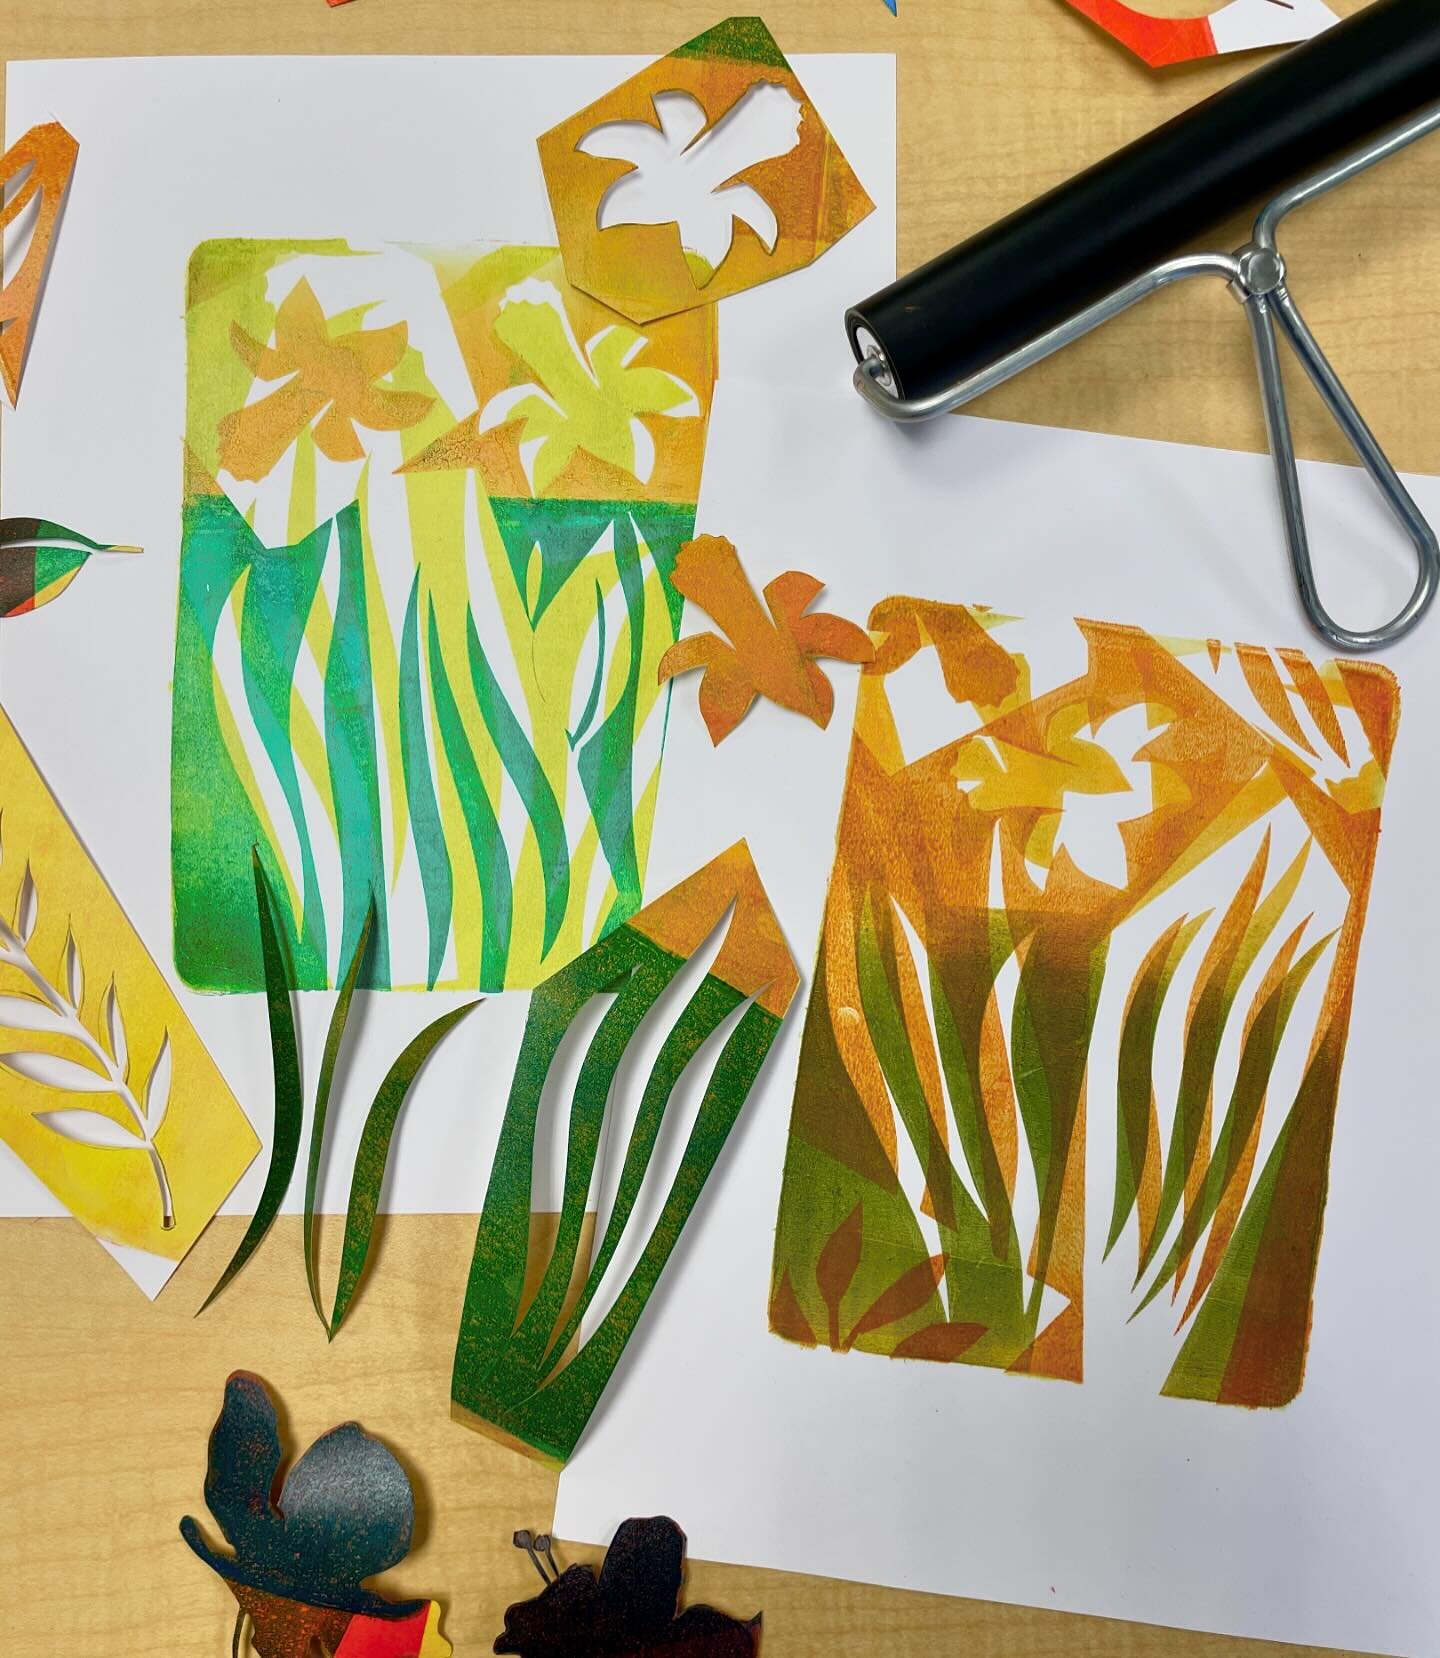 NEW! 🌷 Signs of Spring Workshop! 

Thursday, March 21, 2024
6:00-7:30pm

Location:
@crossroadshotelkc 
2101 Central Street
Kansas City, MO 64108

Let your printmaking skills bloom at the Crossroads Hotel with Studio Art Club! 🪻🪷

We&rsquo;ll use g